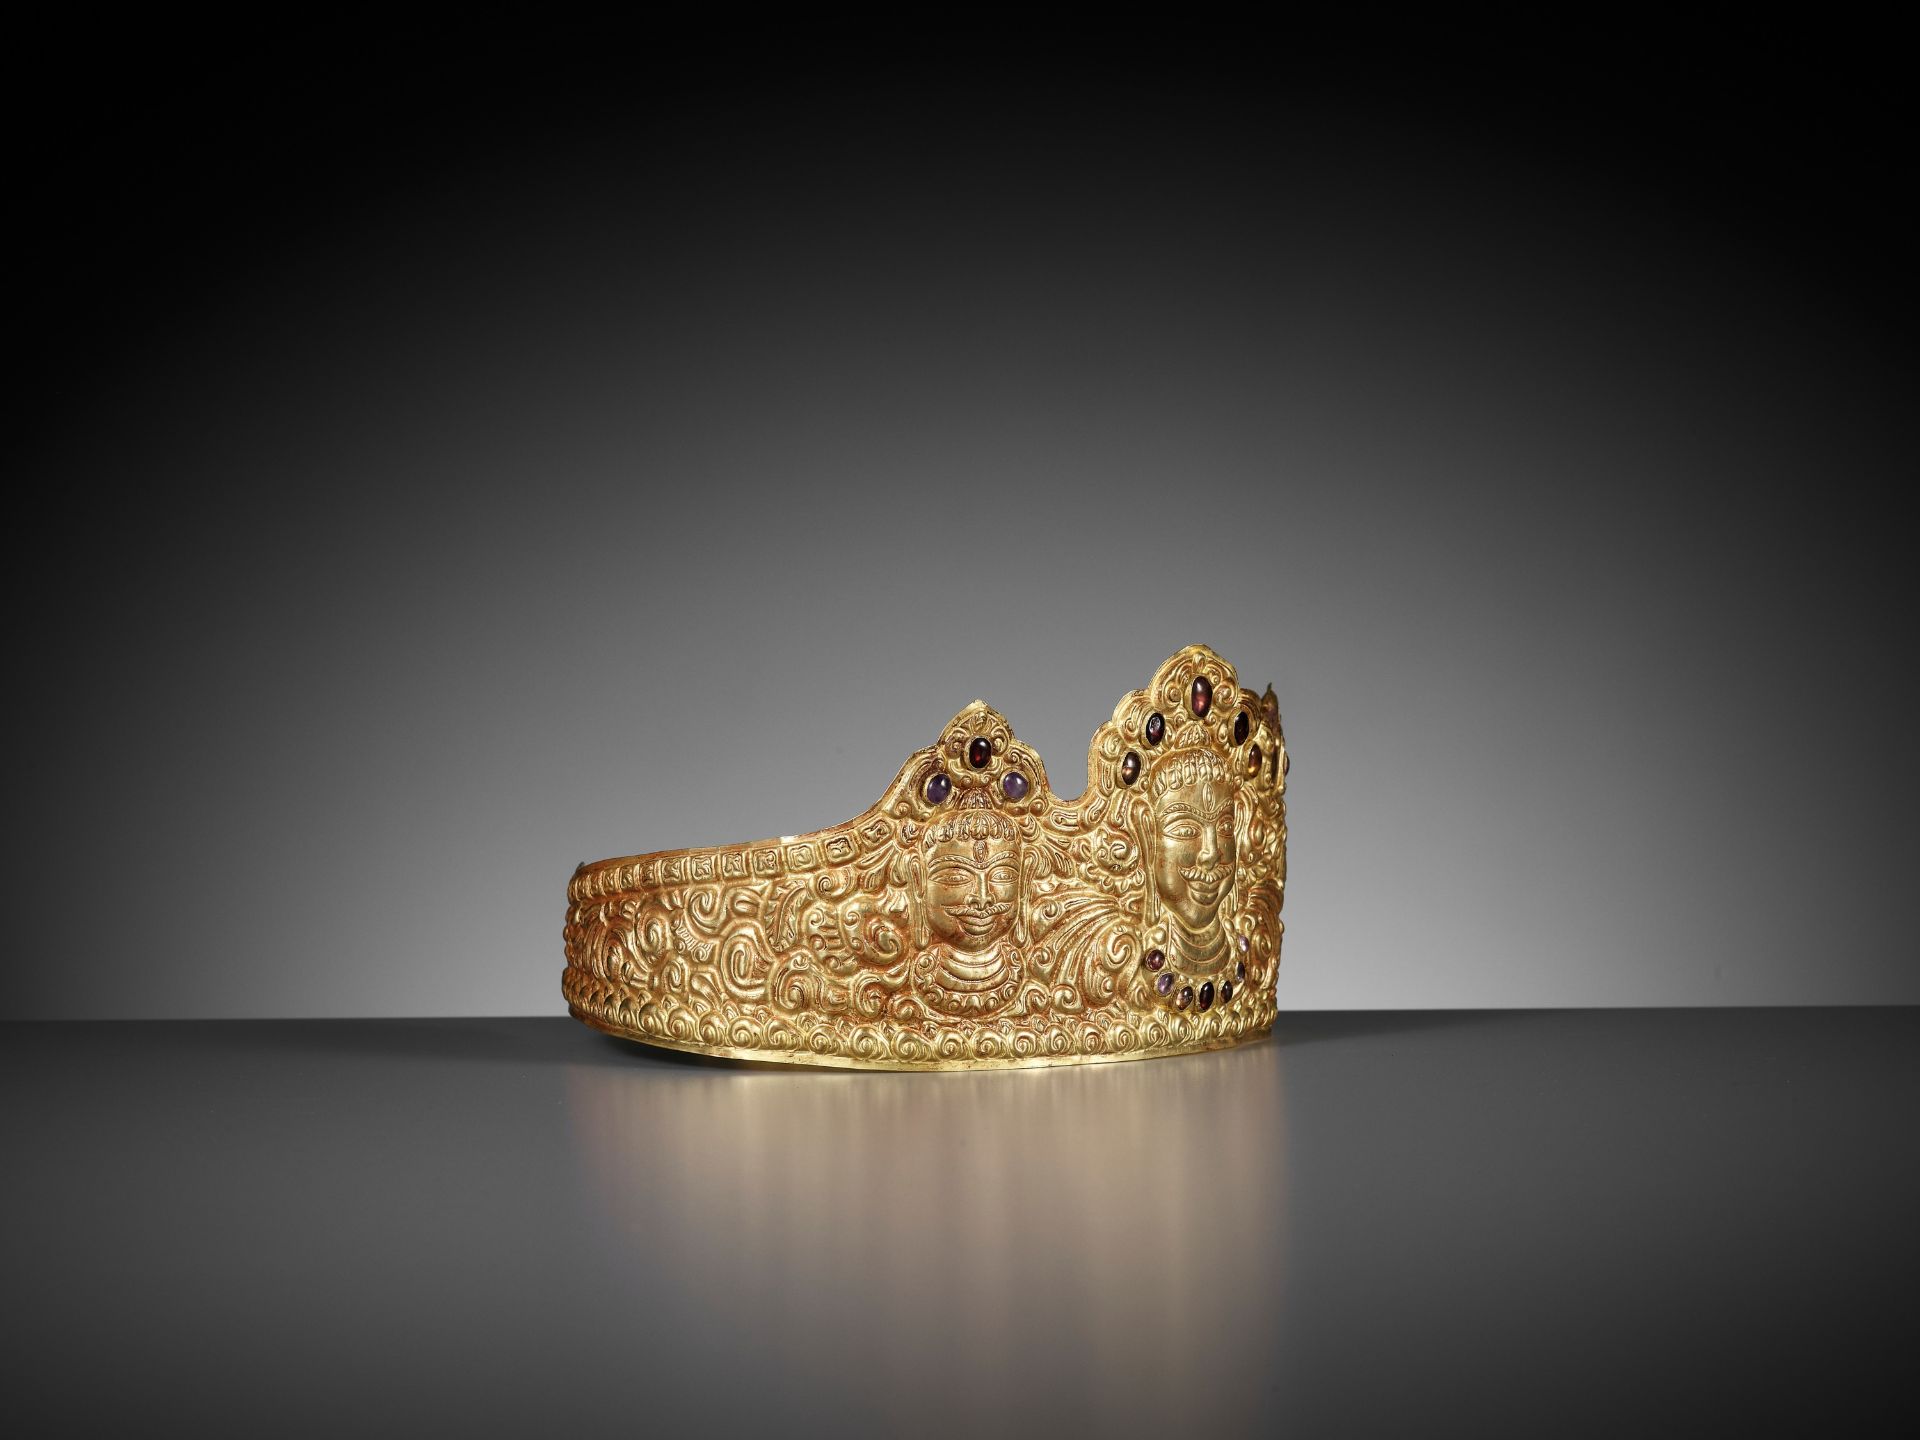 AN IMPORTANT CHAM GOLD REPOUSSE AND GEMSTONE-SET DIADEM, CHAM PERIOD - Image 11 of 11